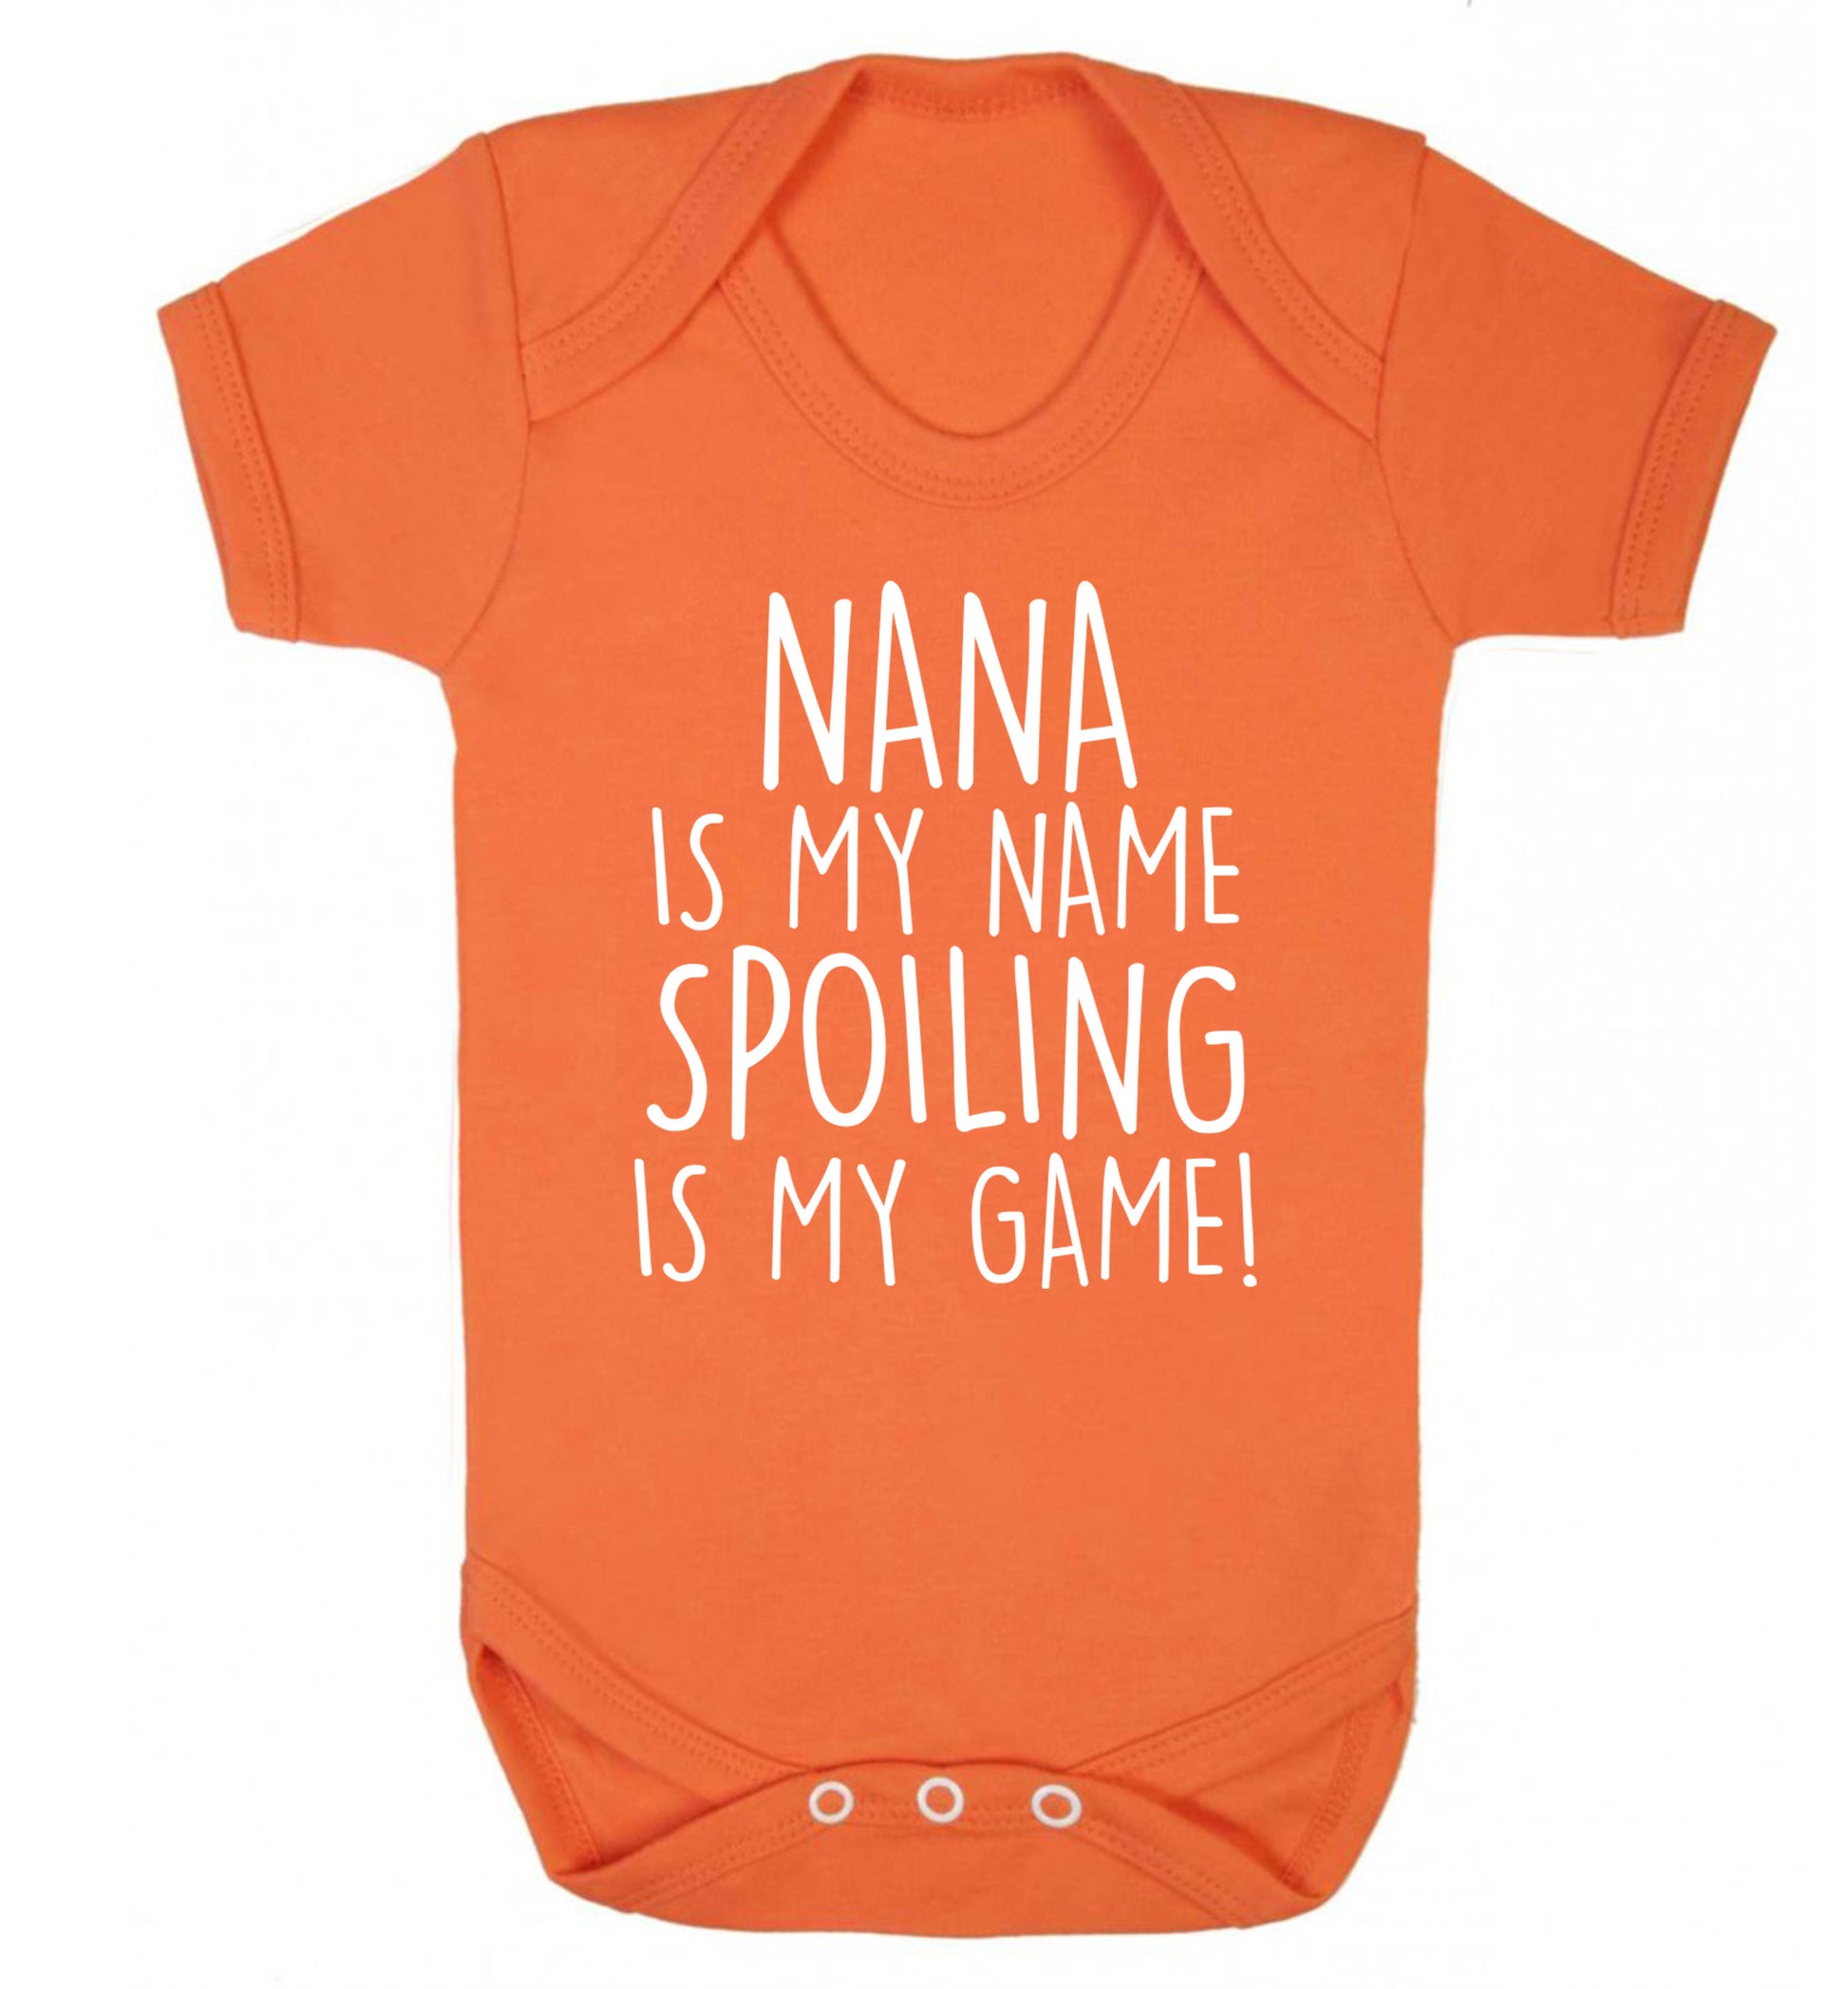 Nana is my name, spoiling is my game Baby Vest orange 18-24 months